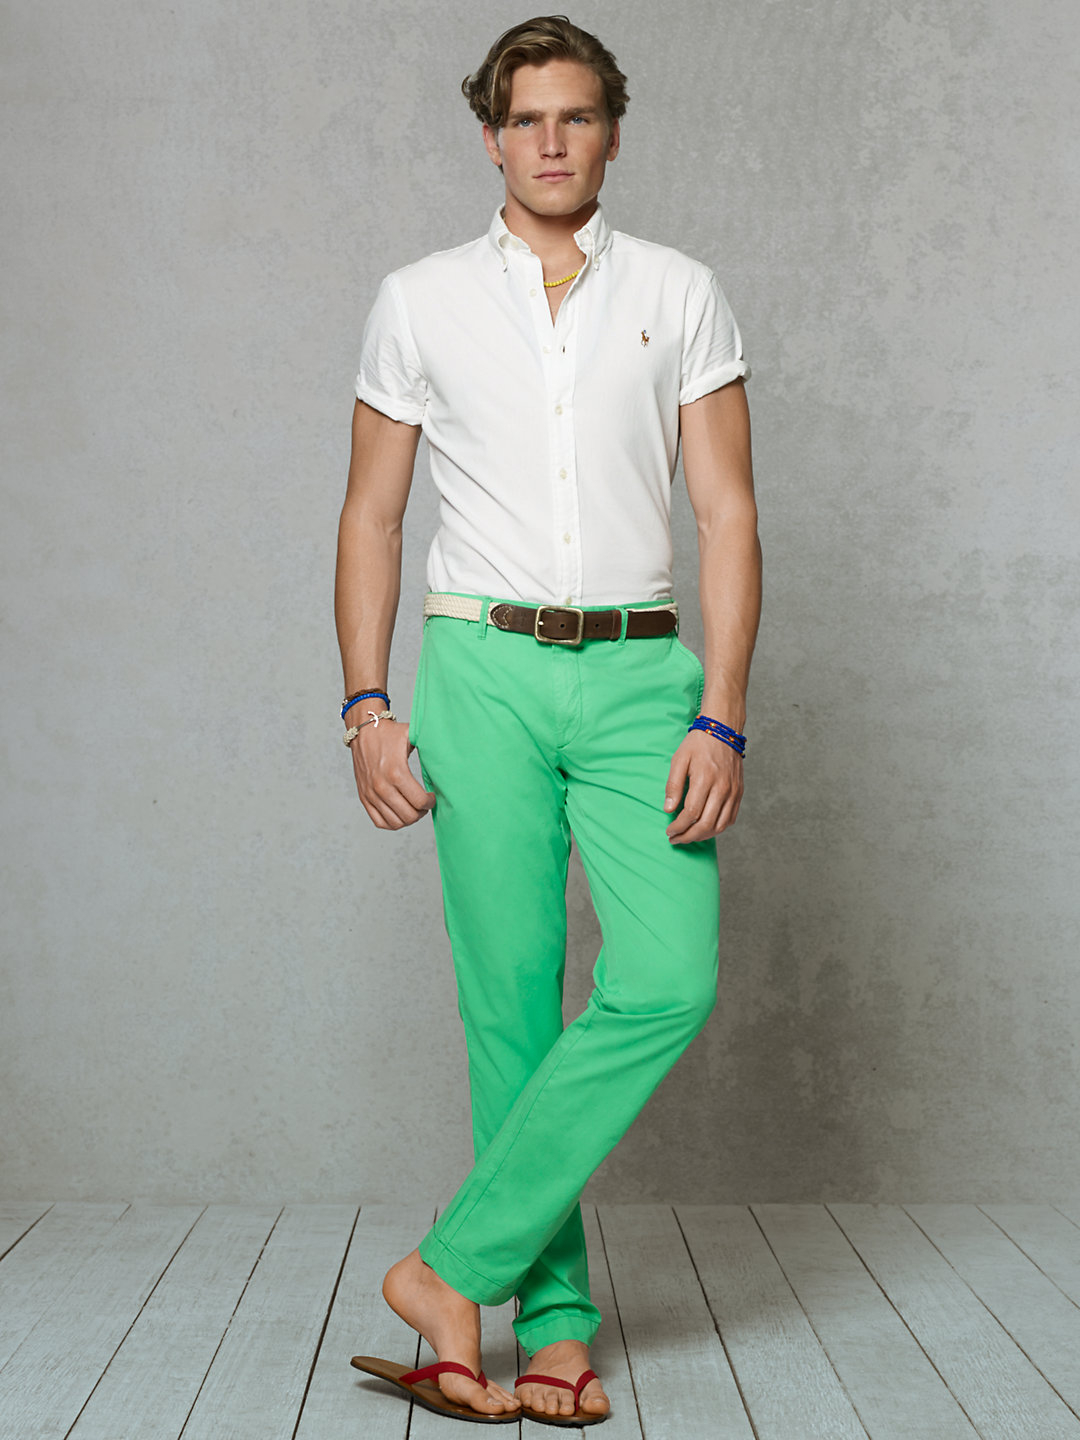 Lyst - Polo Ralph Lauren Straight Fit Laundered Chino in Green for Men